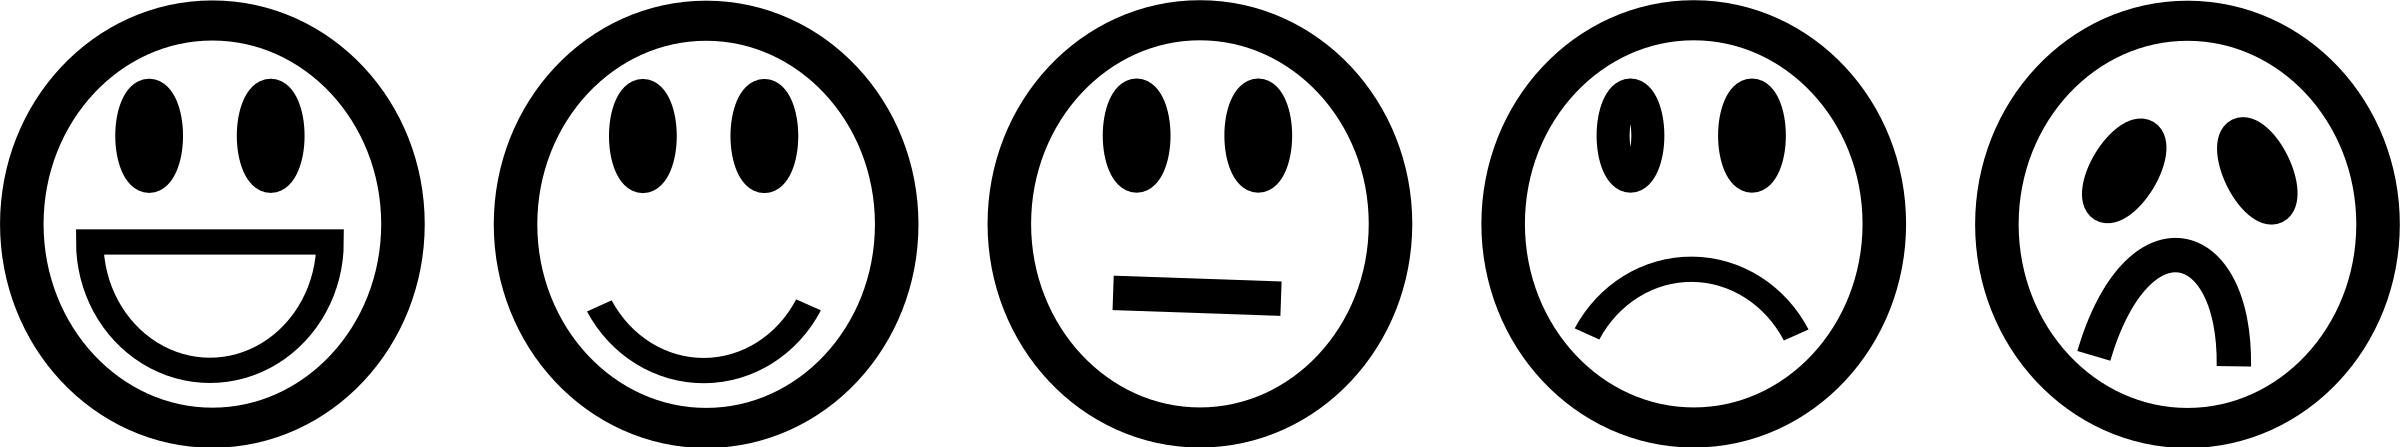 Smileys Black and White PNG icons